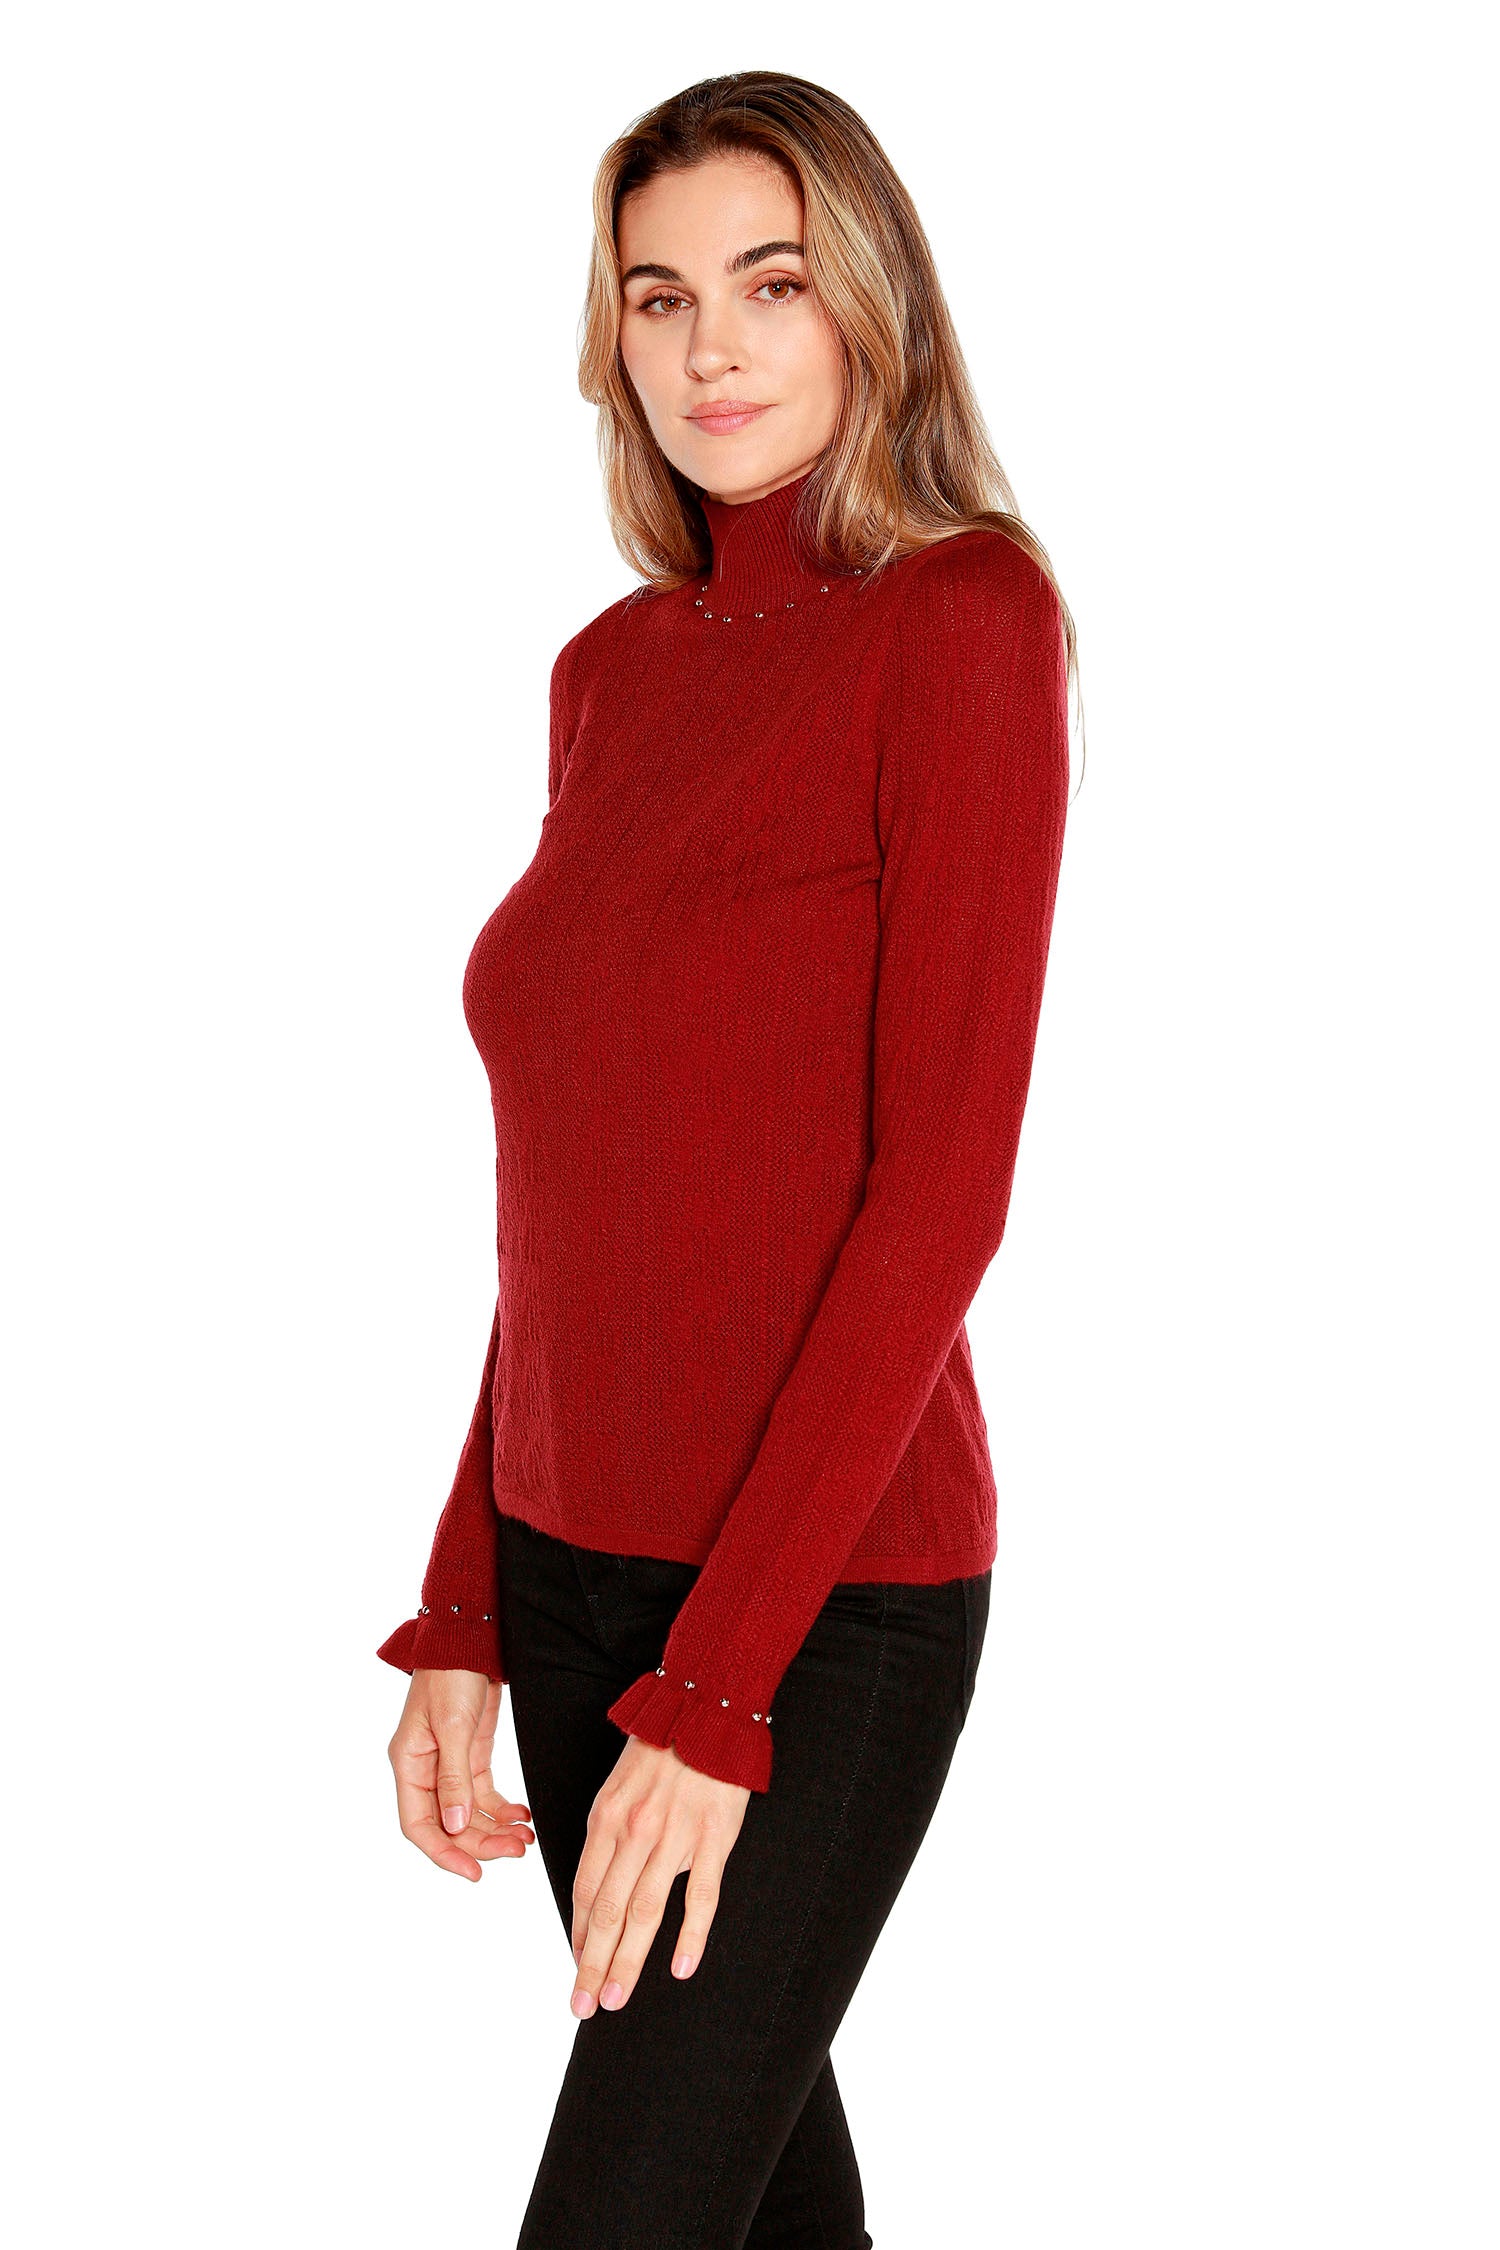 Women's Body Con Sweater with Ruffles and Nailheads